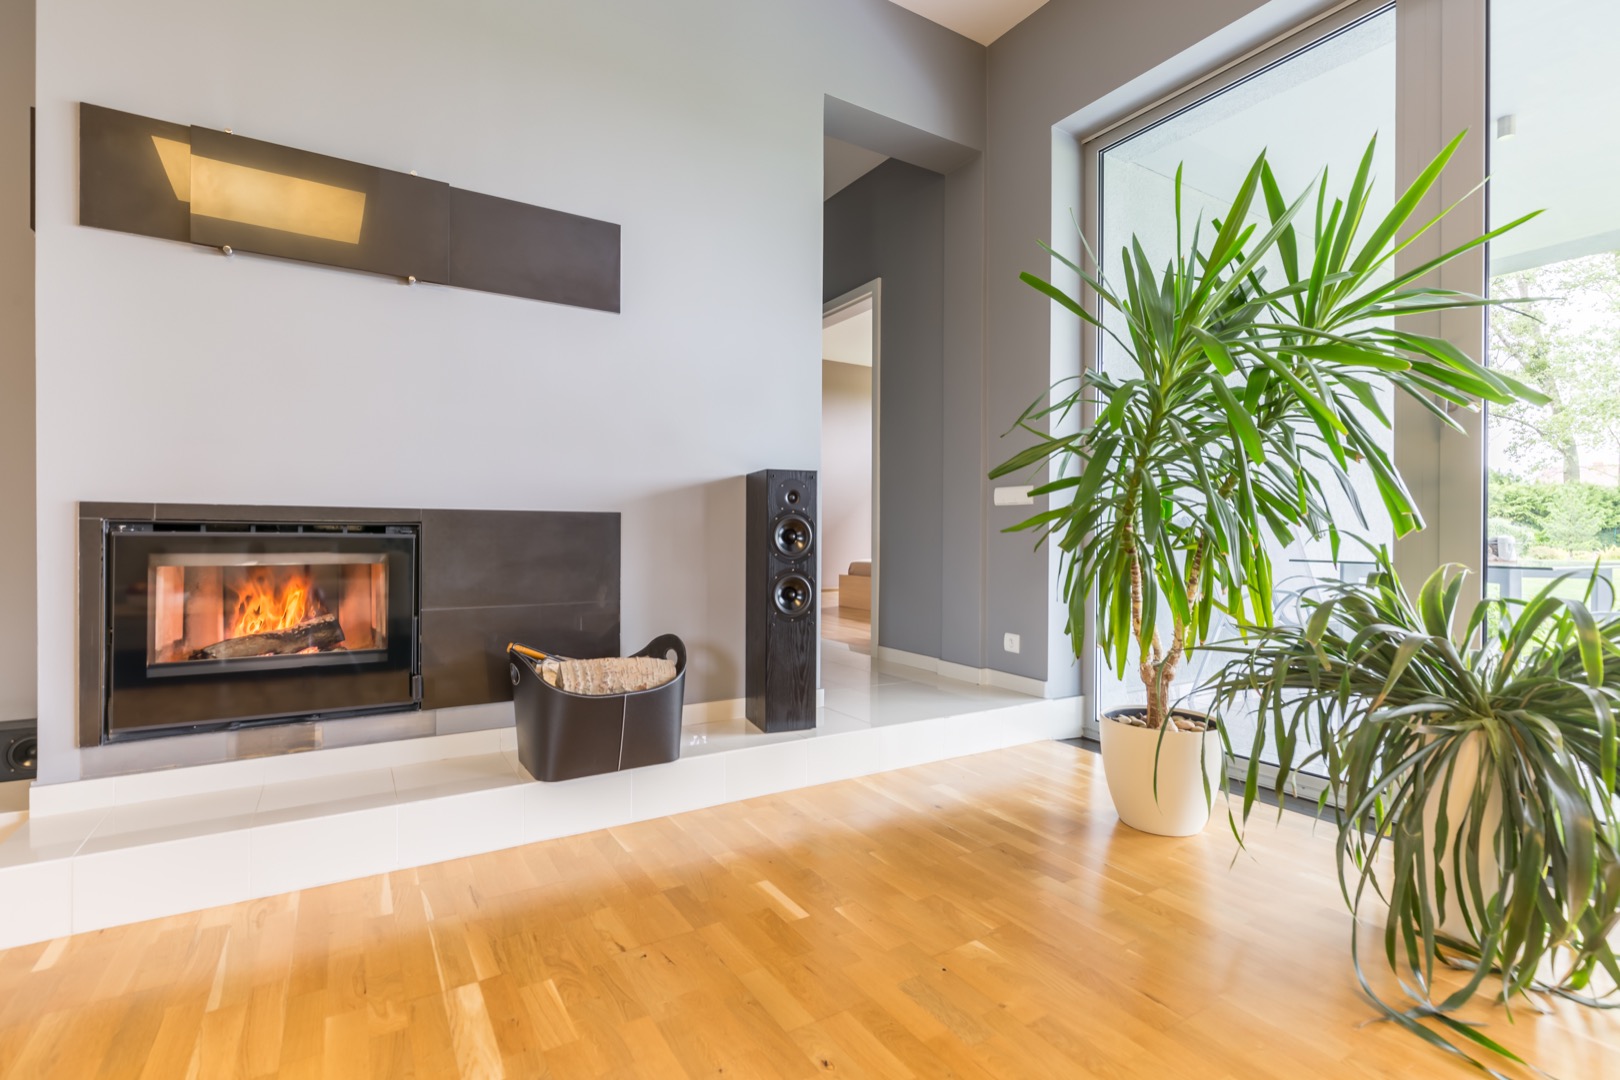 Modern minimalist fireplace in villa interior with potted plants